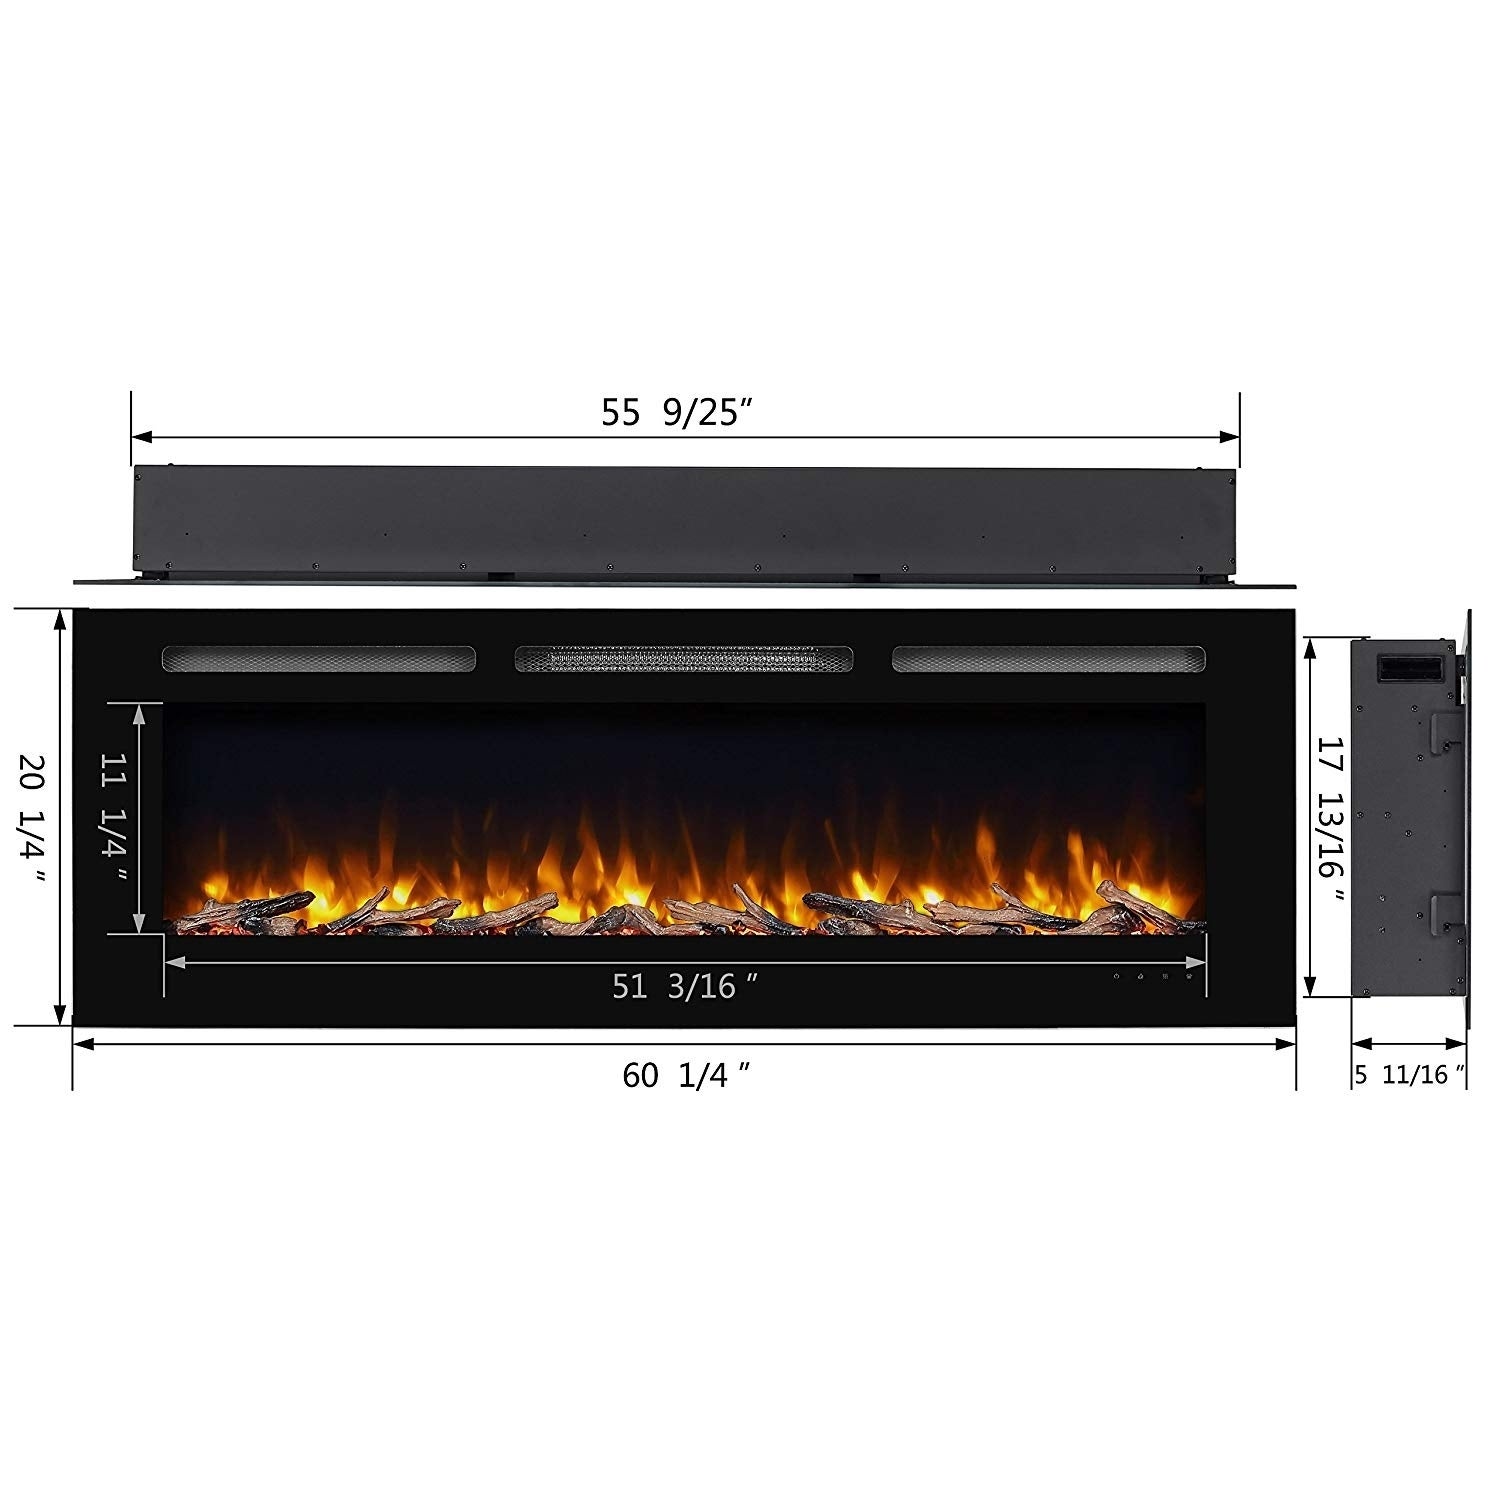 Mid Century Modern Electric Fireplace Luxury 60" Alice In Wall Recessed Electric Fireplace 1500w Black